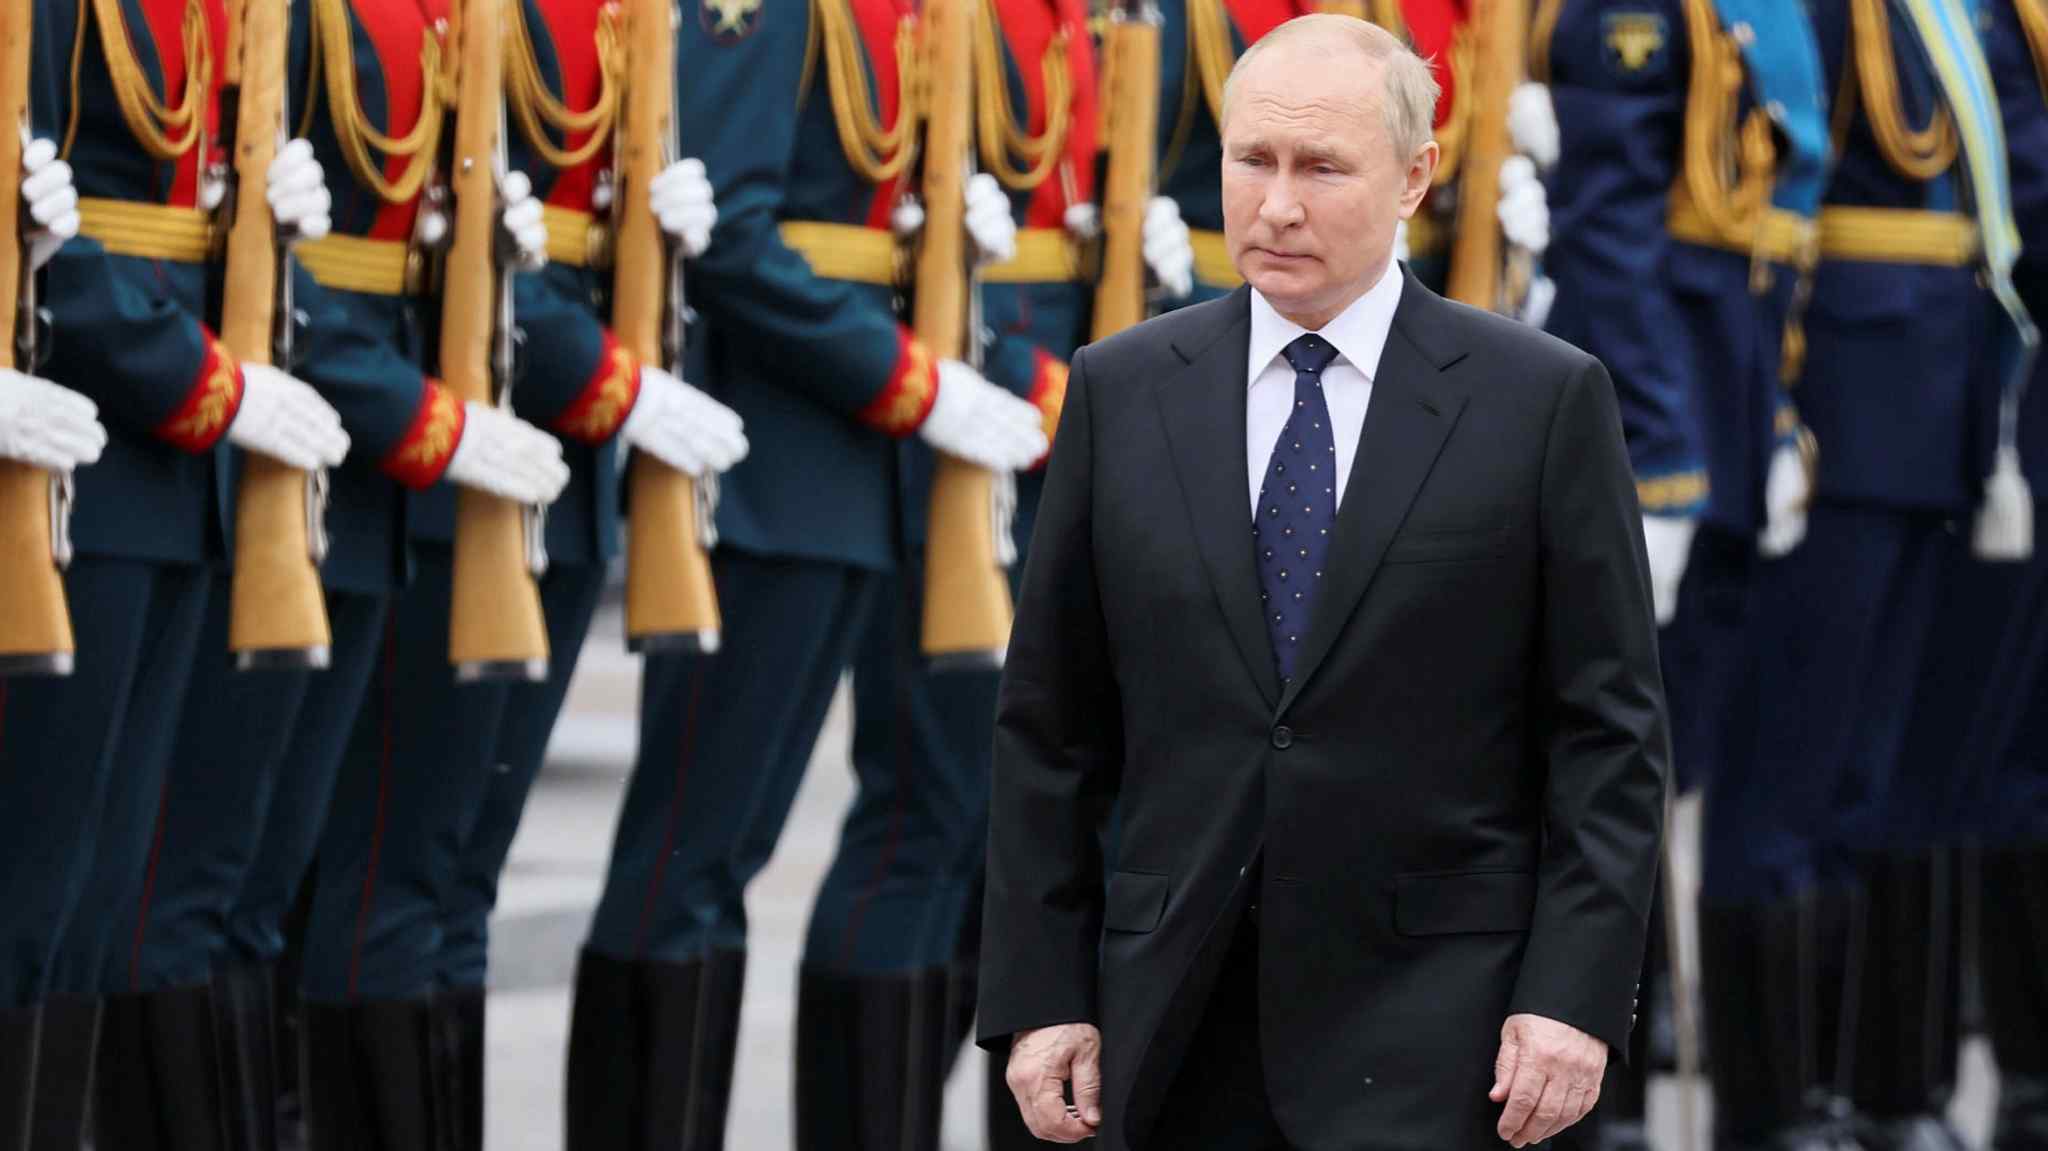 Putin’s rupture with the west turns Russia towards China